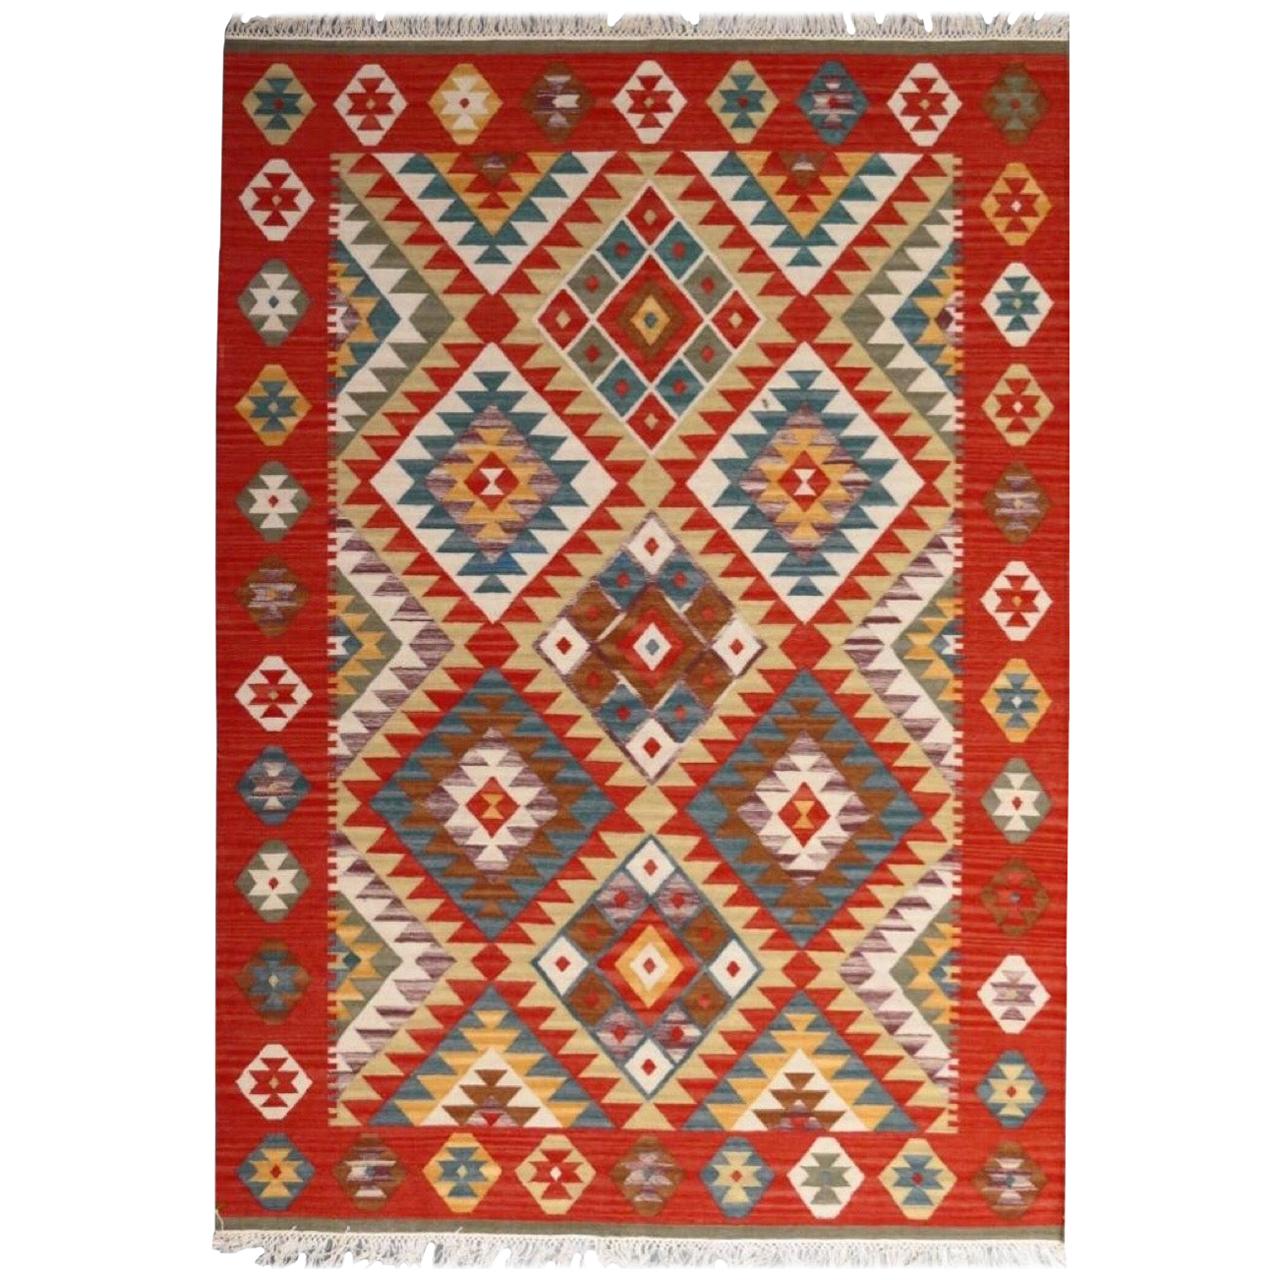 Beautiful New Anatolian Design Handwoven Kilim Rug, 6ft 6in x 9ft 10in For Sale